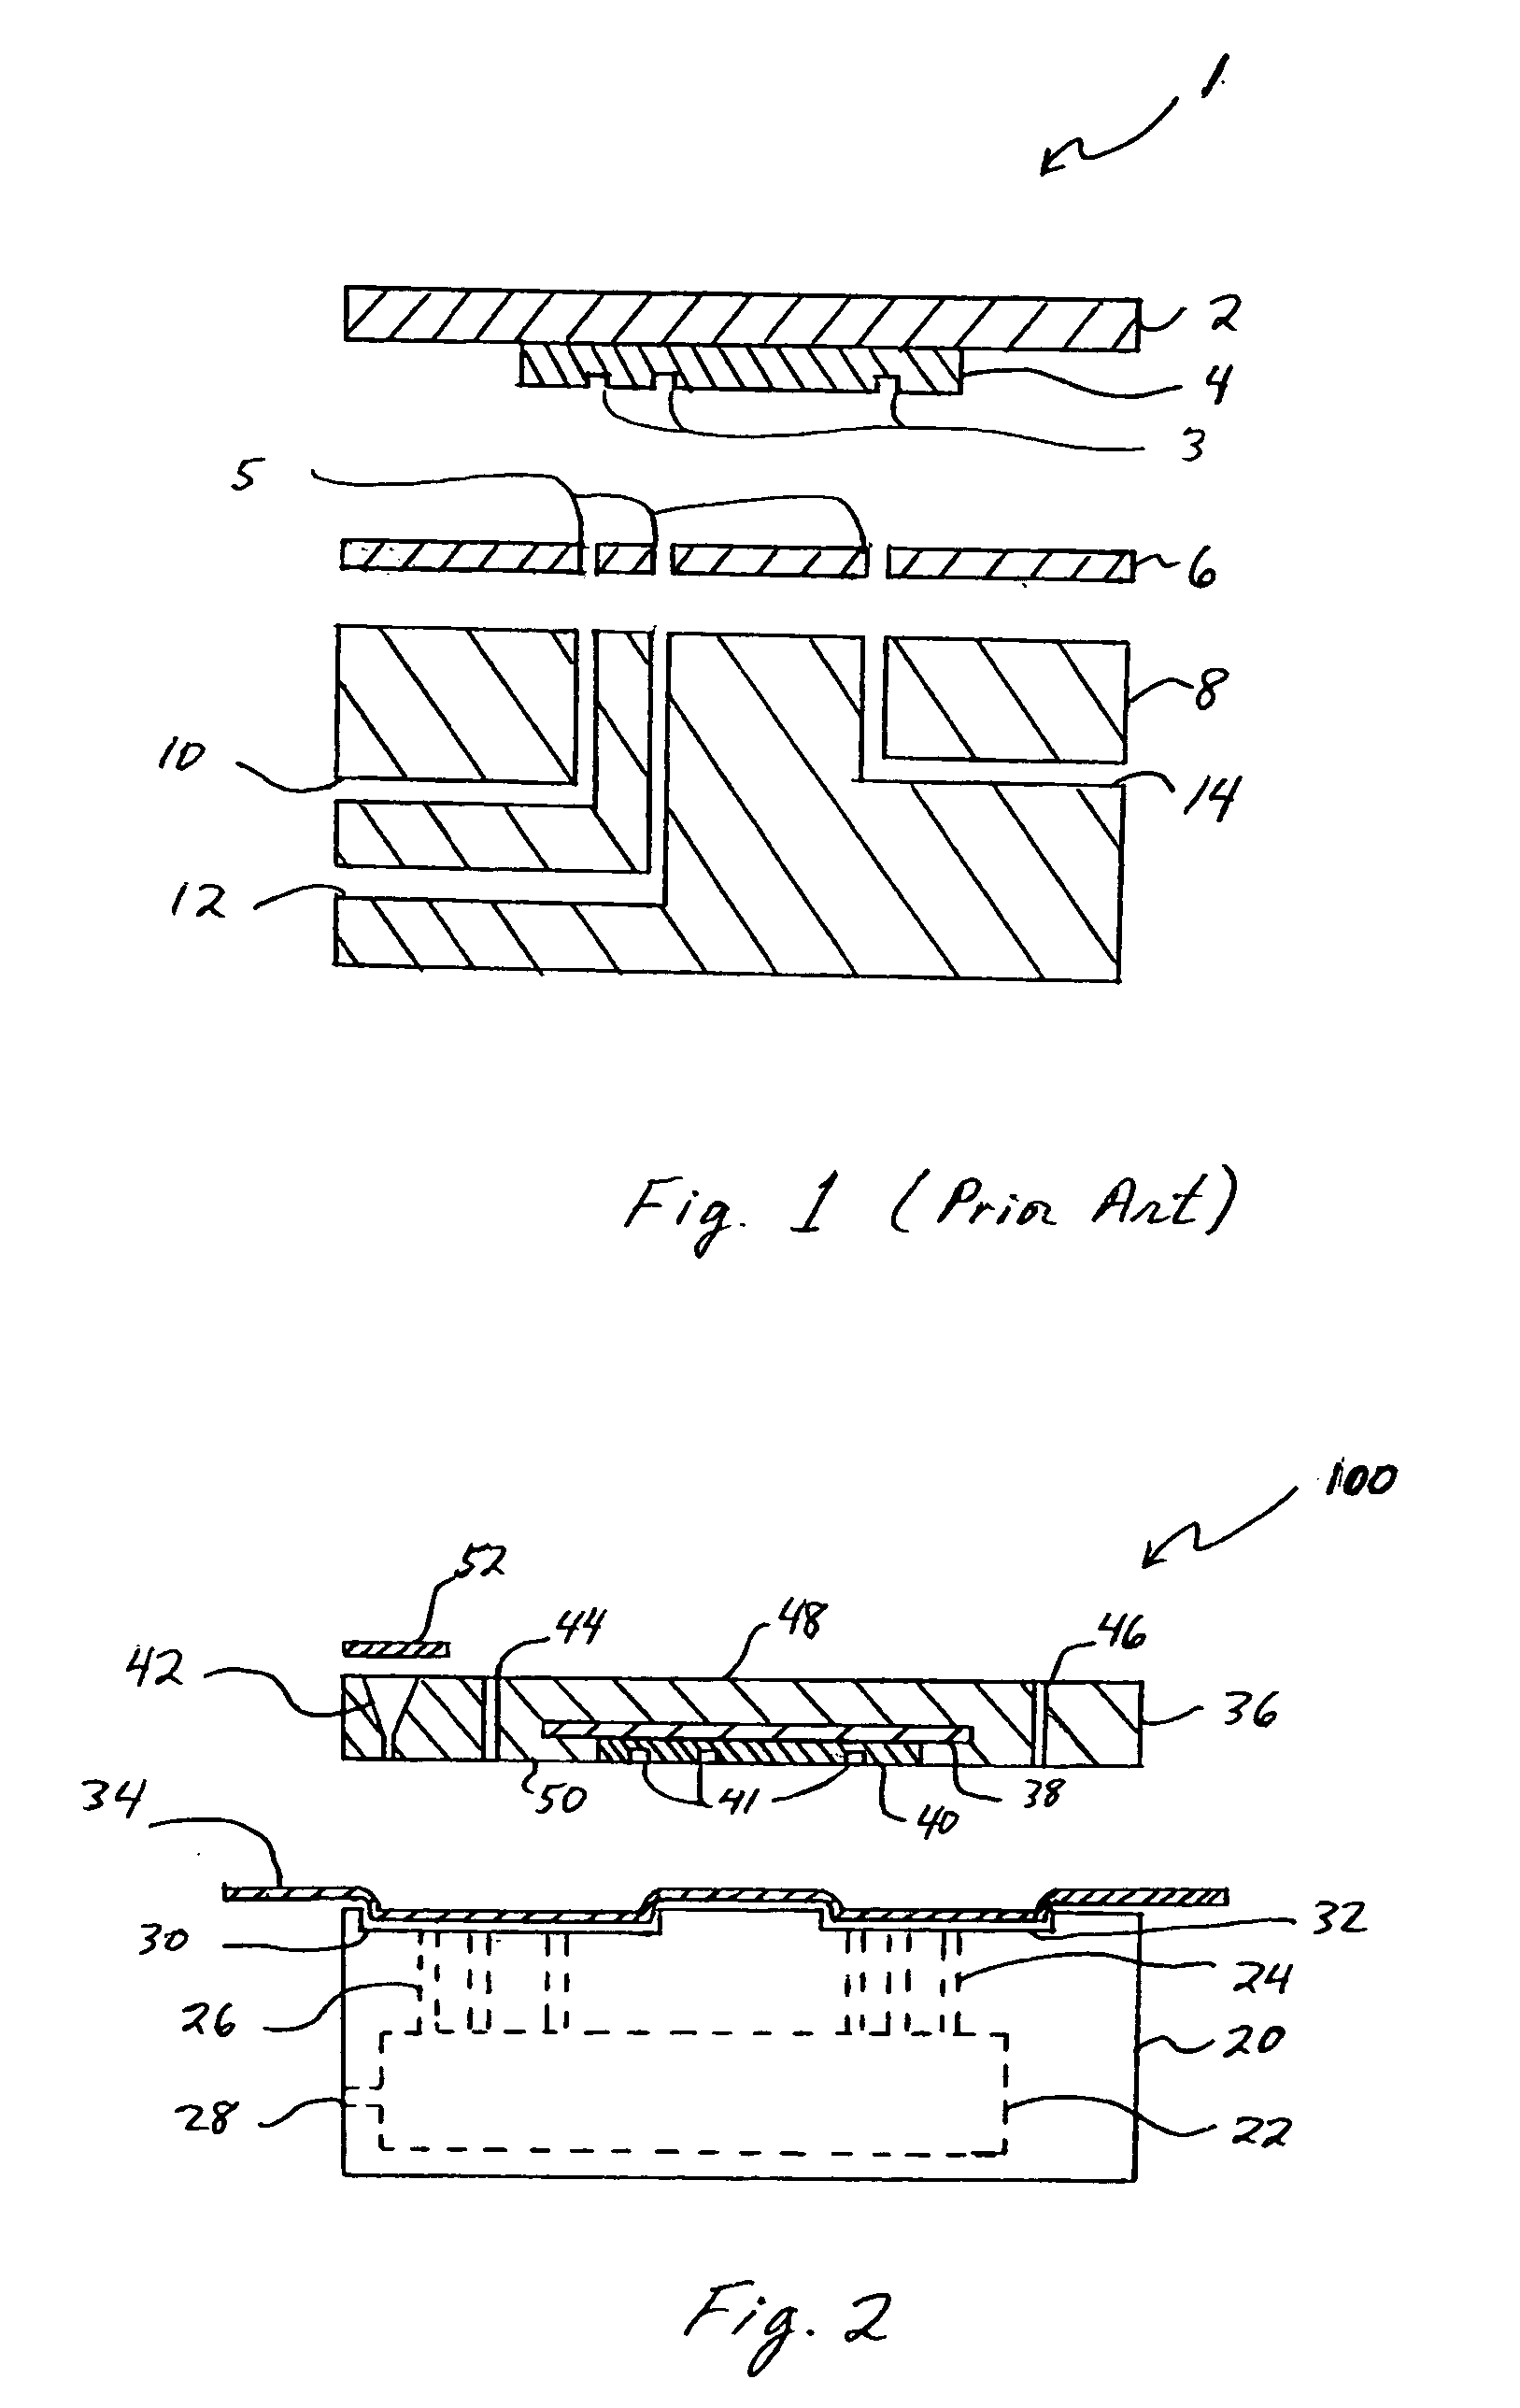 Microfluidics packages and methods of using same